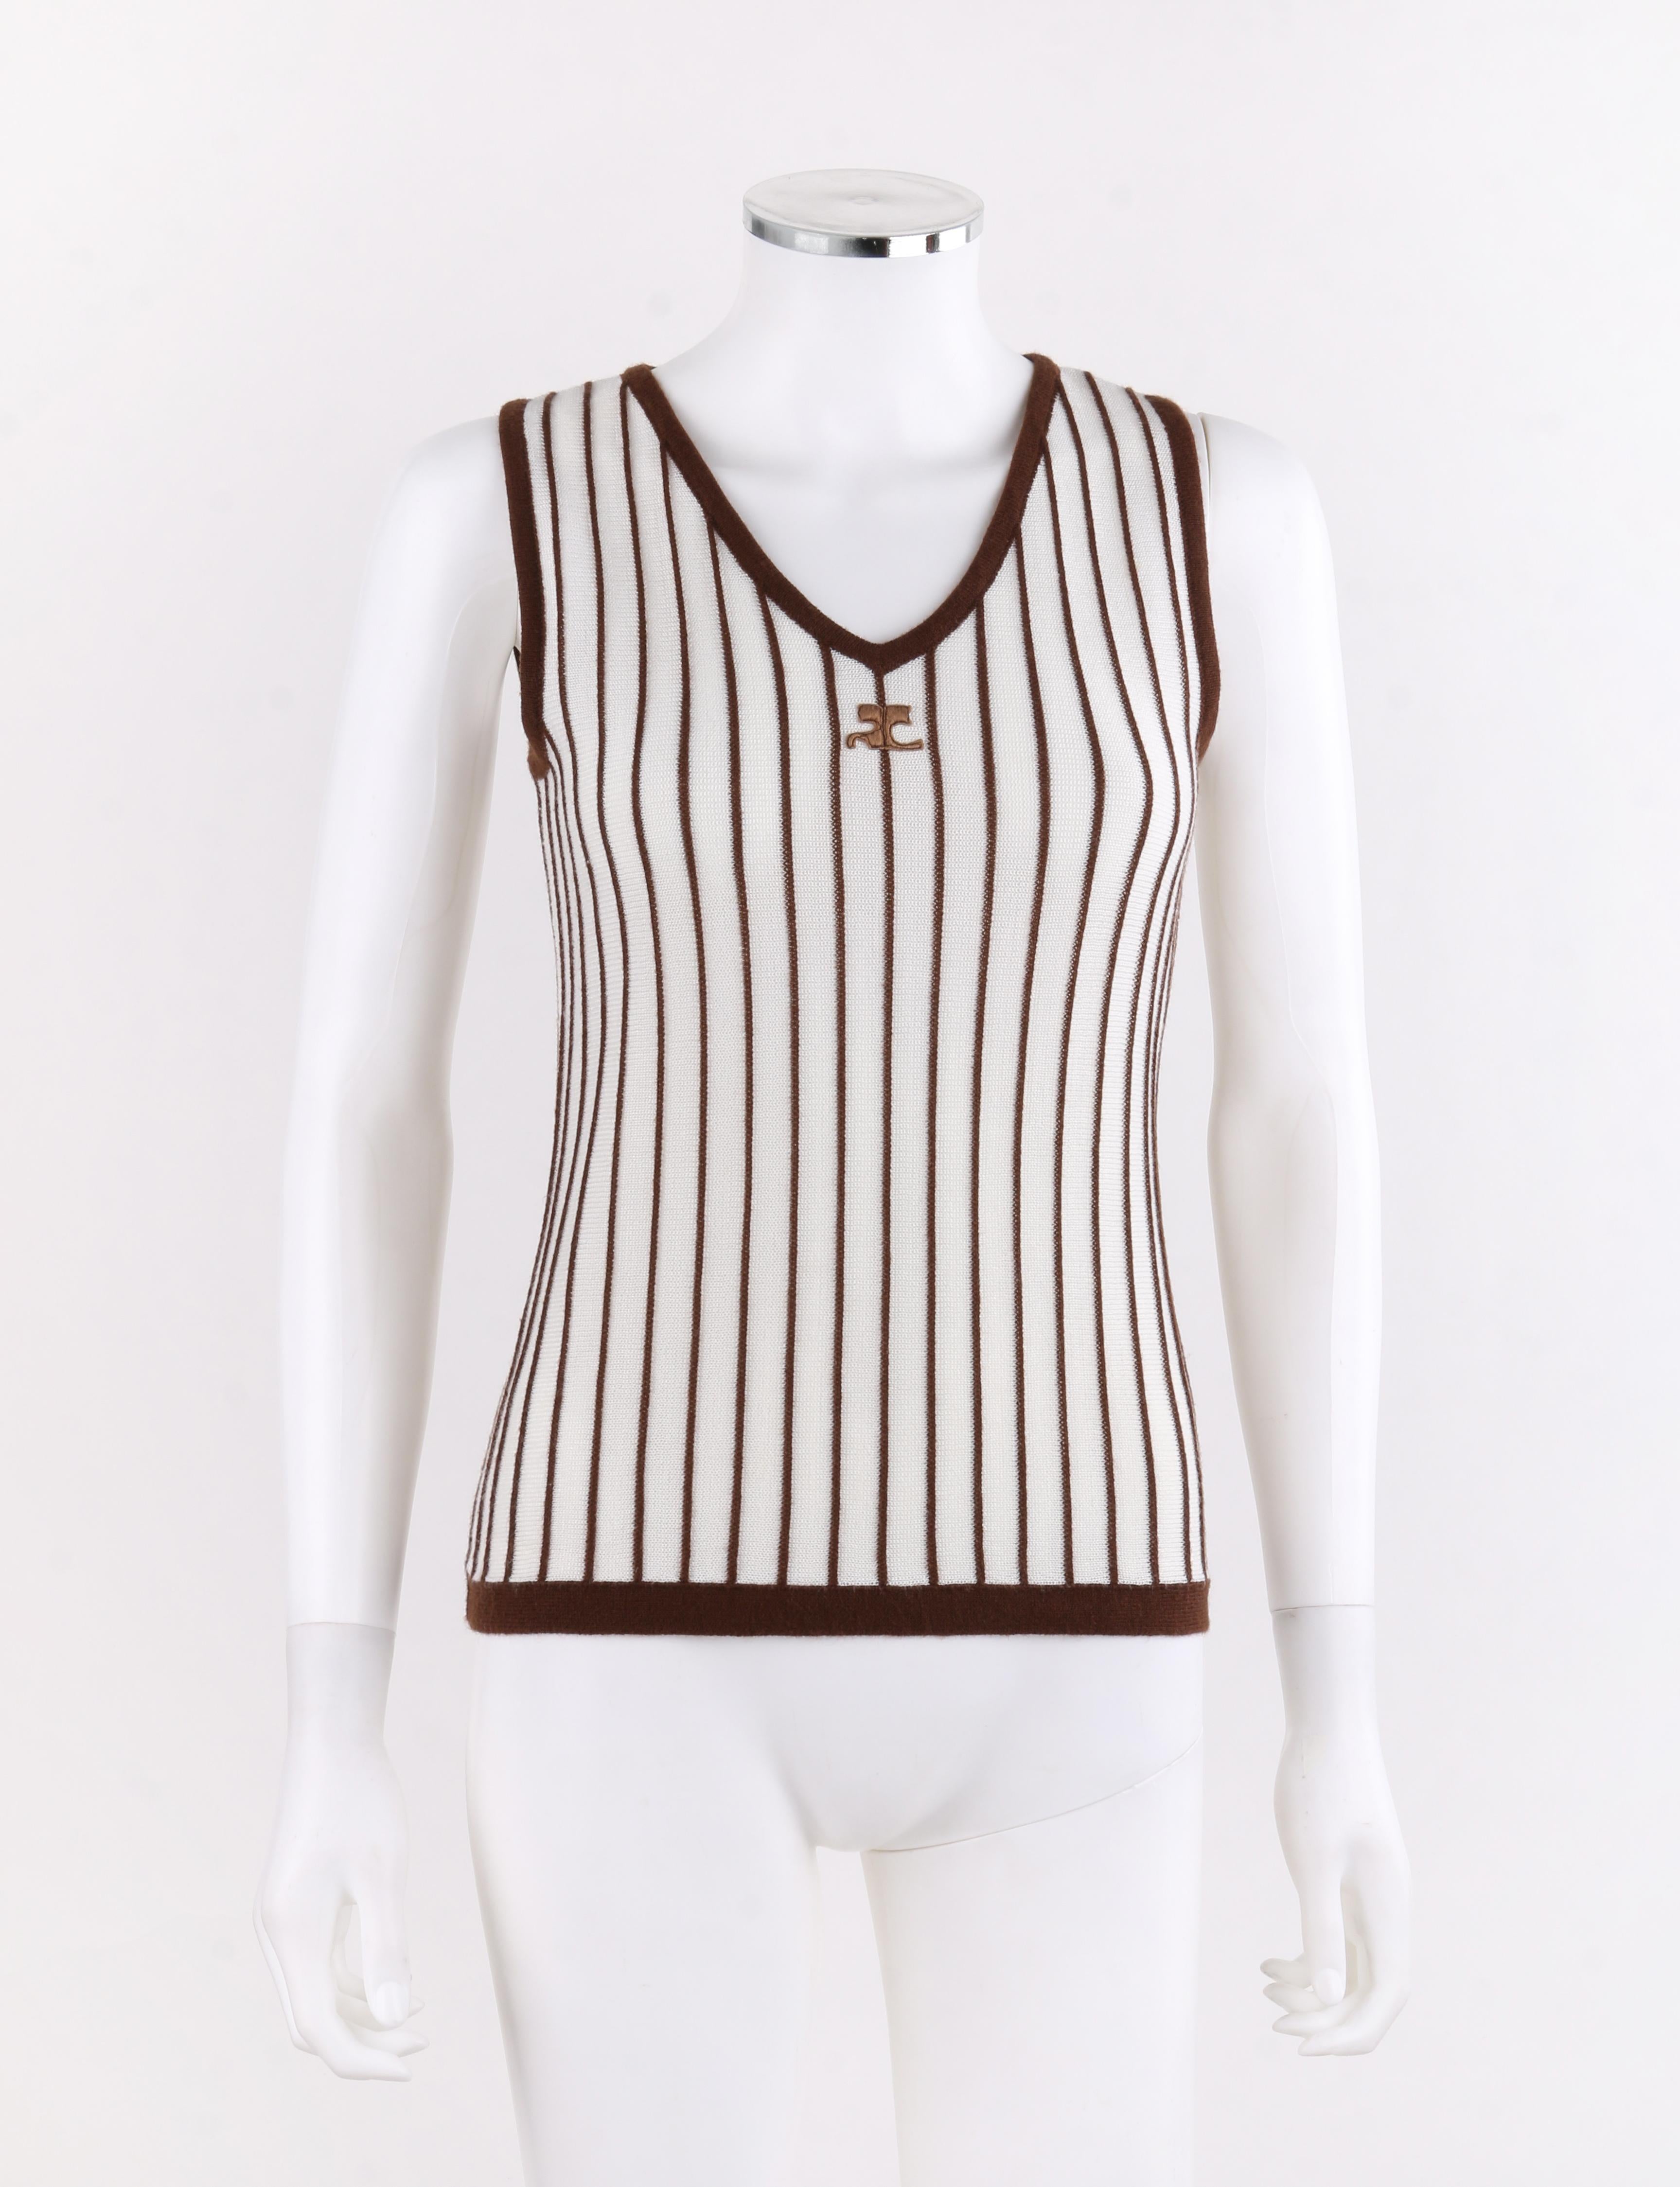 COURREGES c.1970's Sleeveless V-Neck Striped Knit Sweater Vest Tank Top
 
Circa: 1970’s
Label(s): Courreges Paris
Designer: Andre Courreges
Style: Sweater vest
Color(s): Beige, brown
Lined: No
Marked Fabric Content: “100% acrylic”
Additional Details